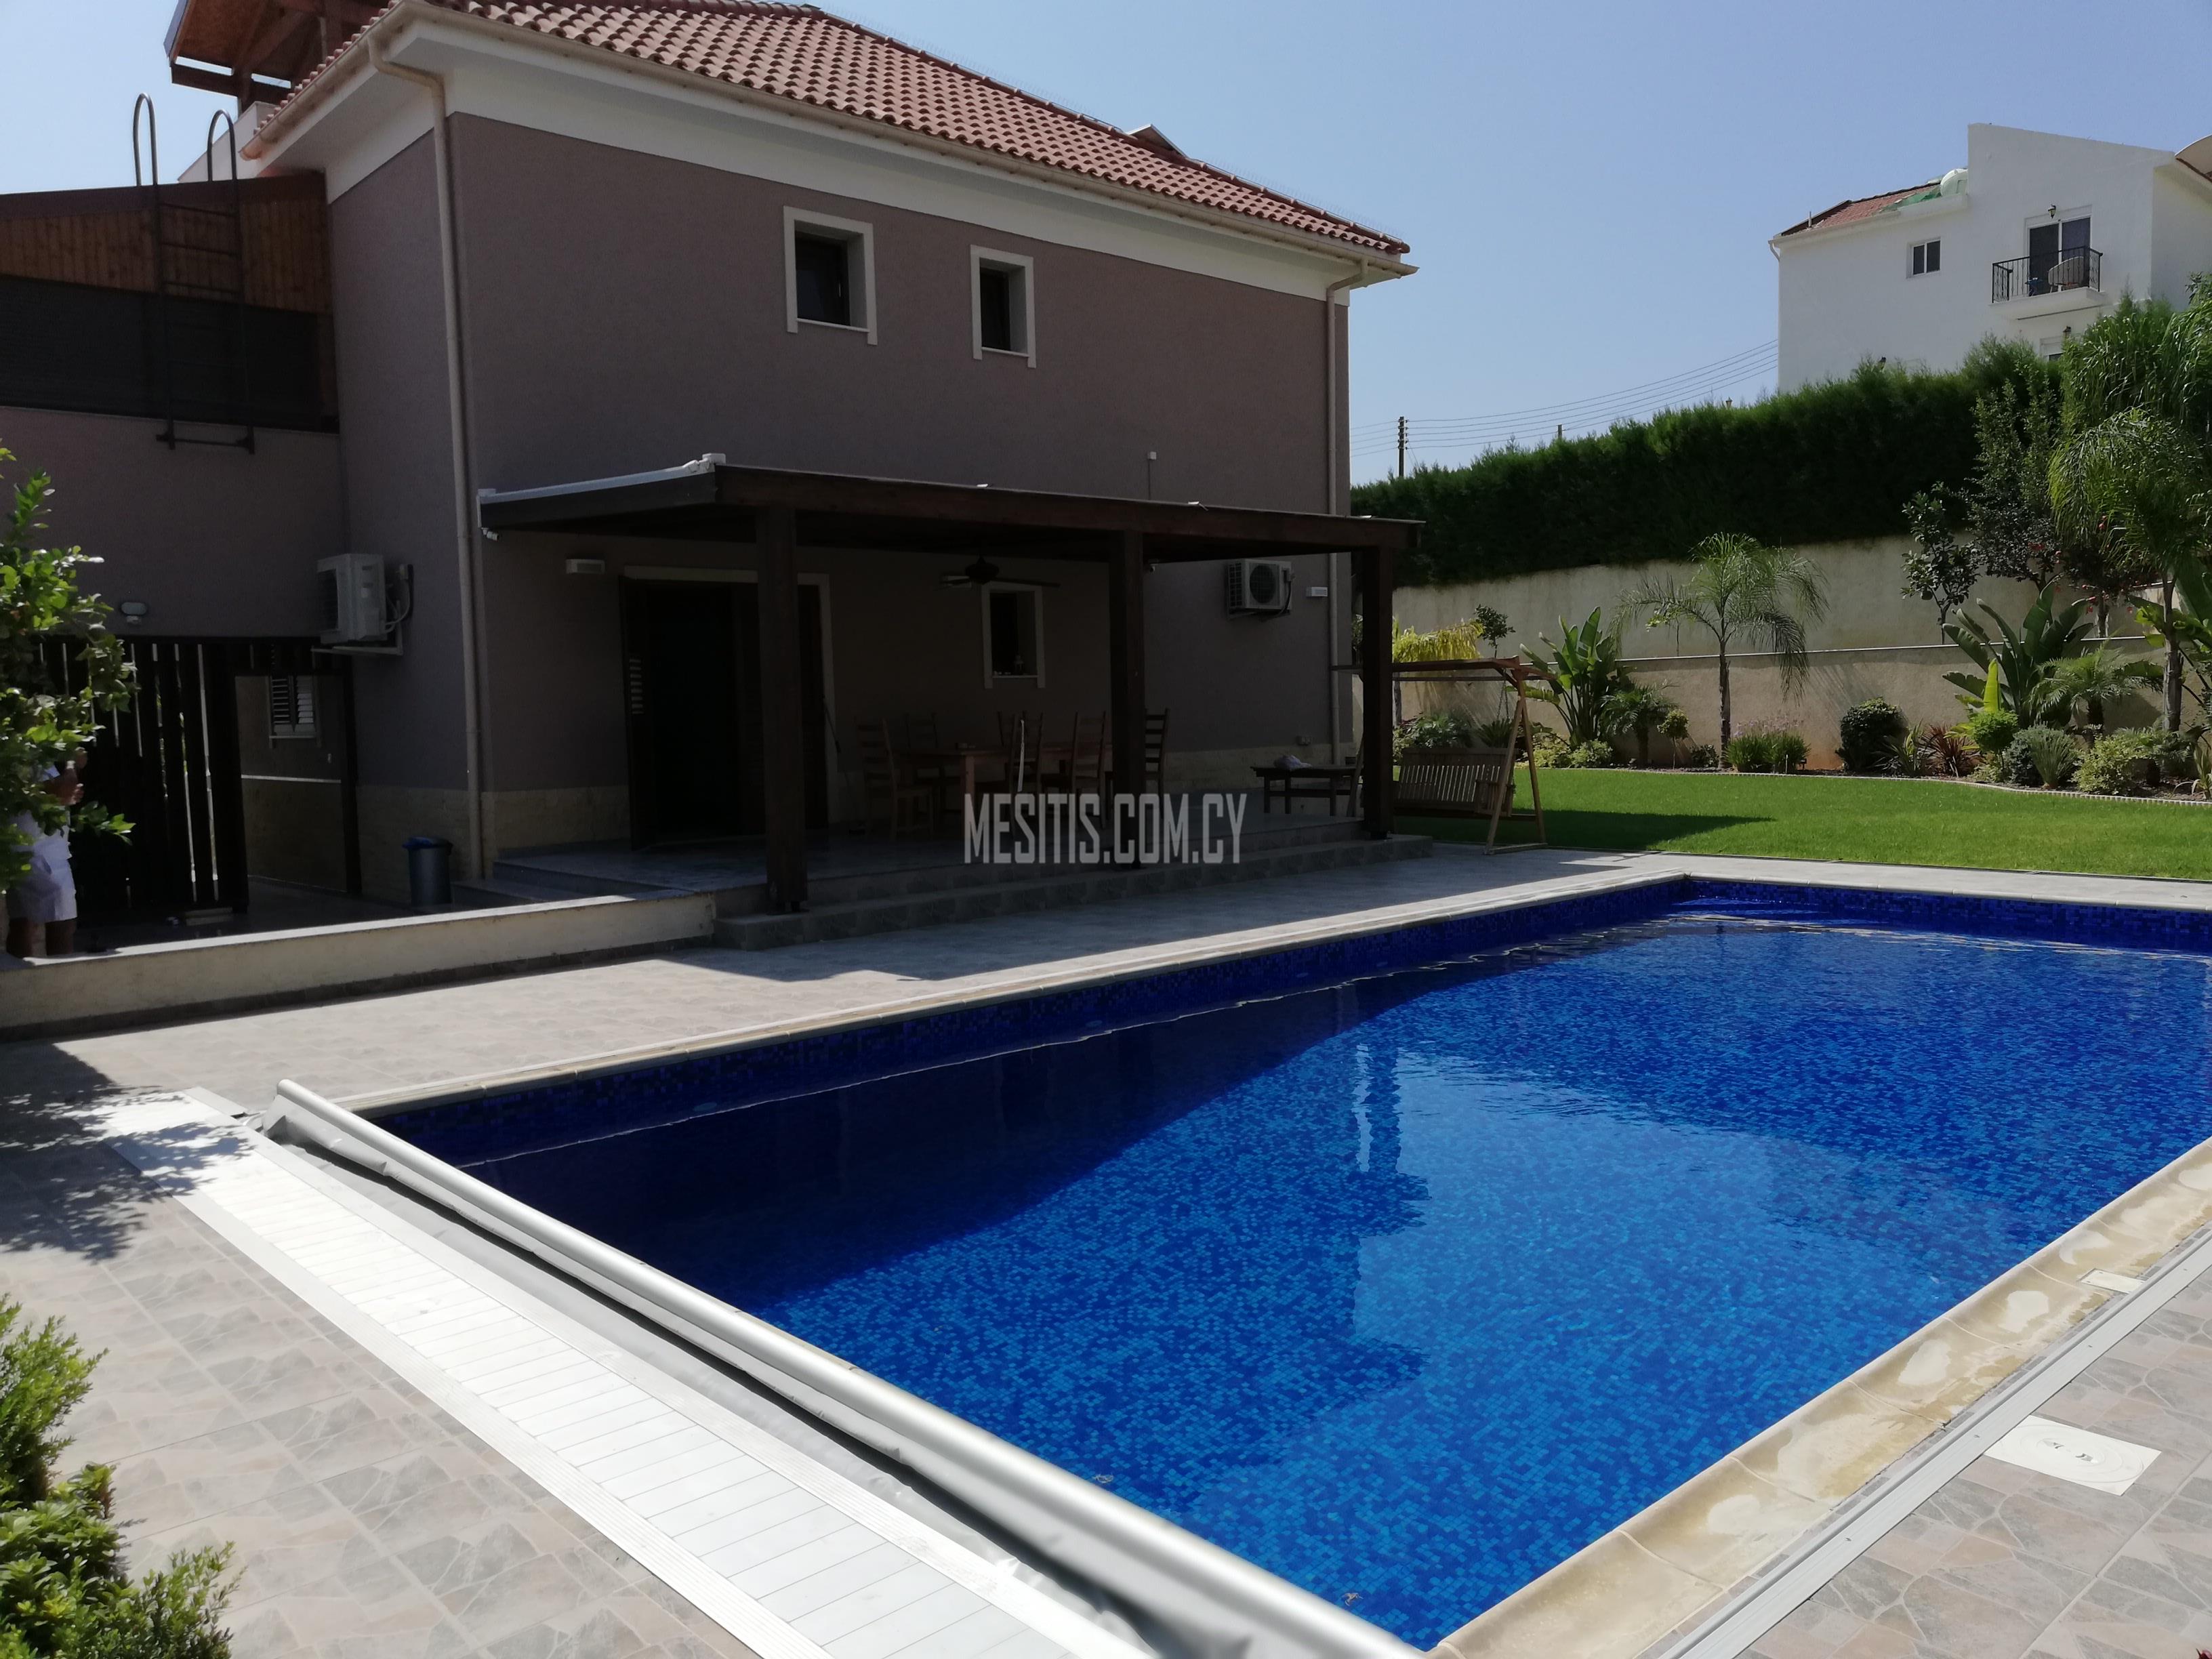 Detached House With Private Pool And Big Yard  For Sale Just Metres Away From Four Season Hotel #3115-0